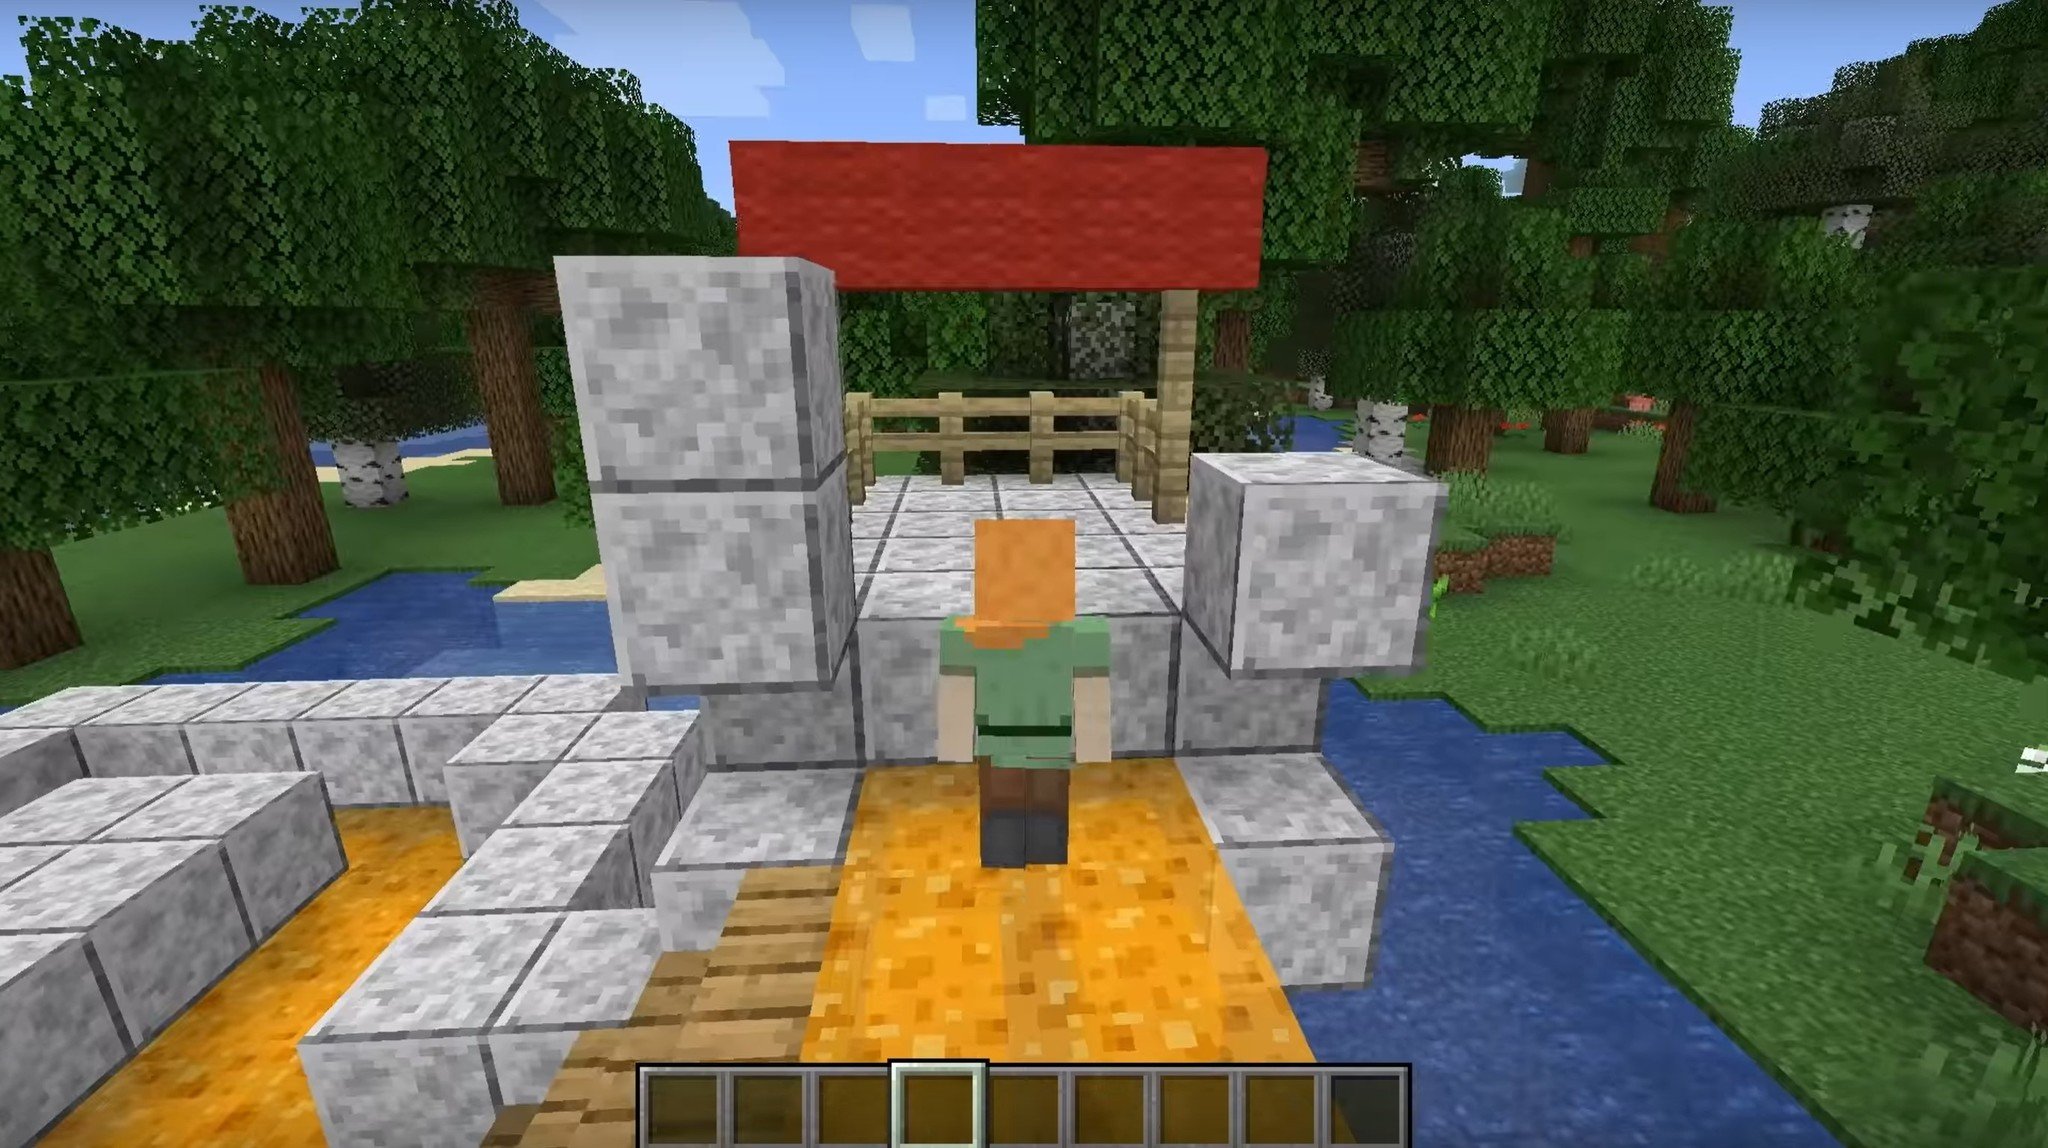 Minecraft's new honey blocks are somehow perfect for parkour courses